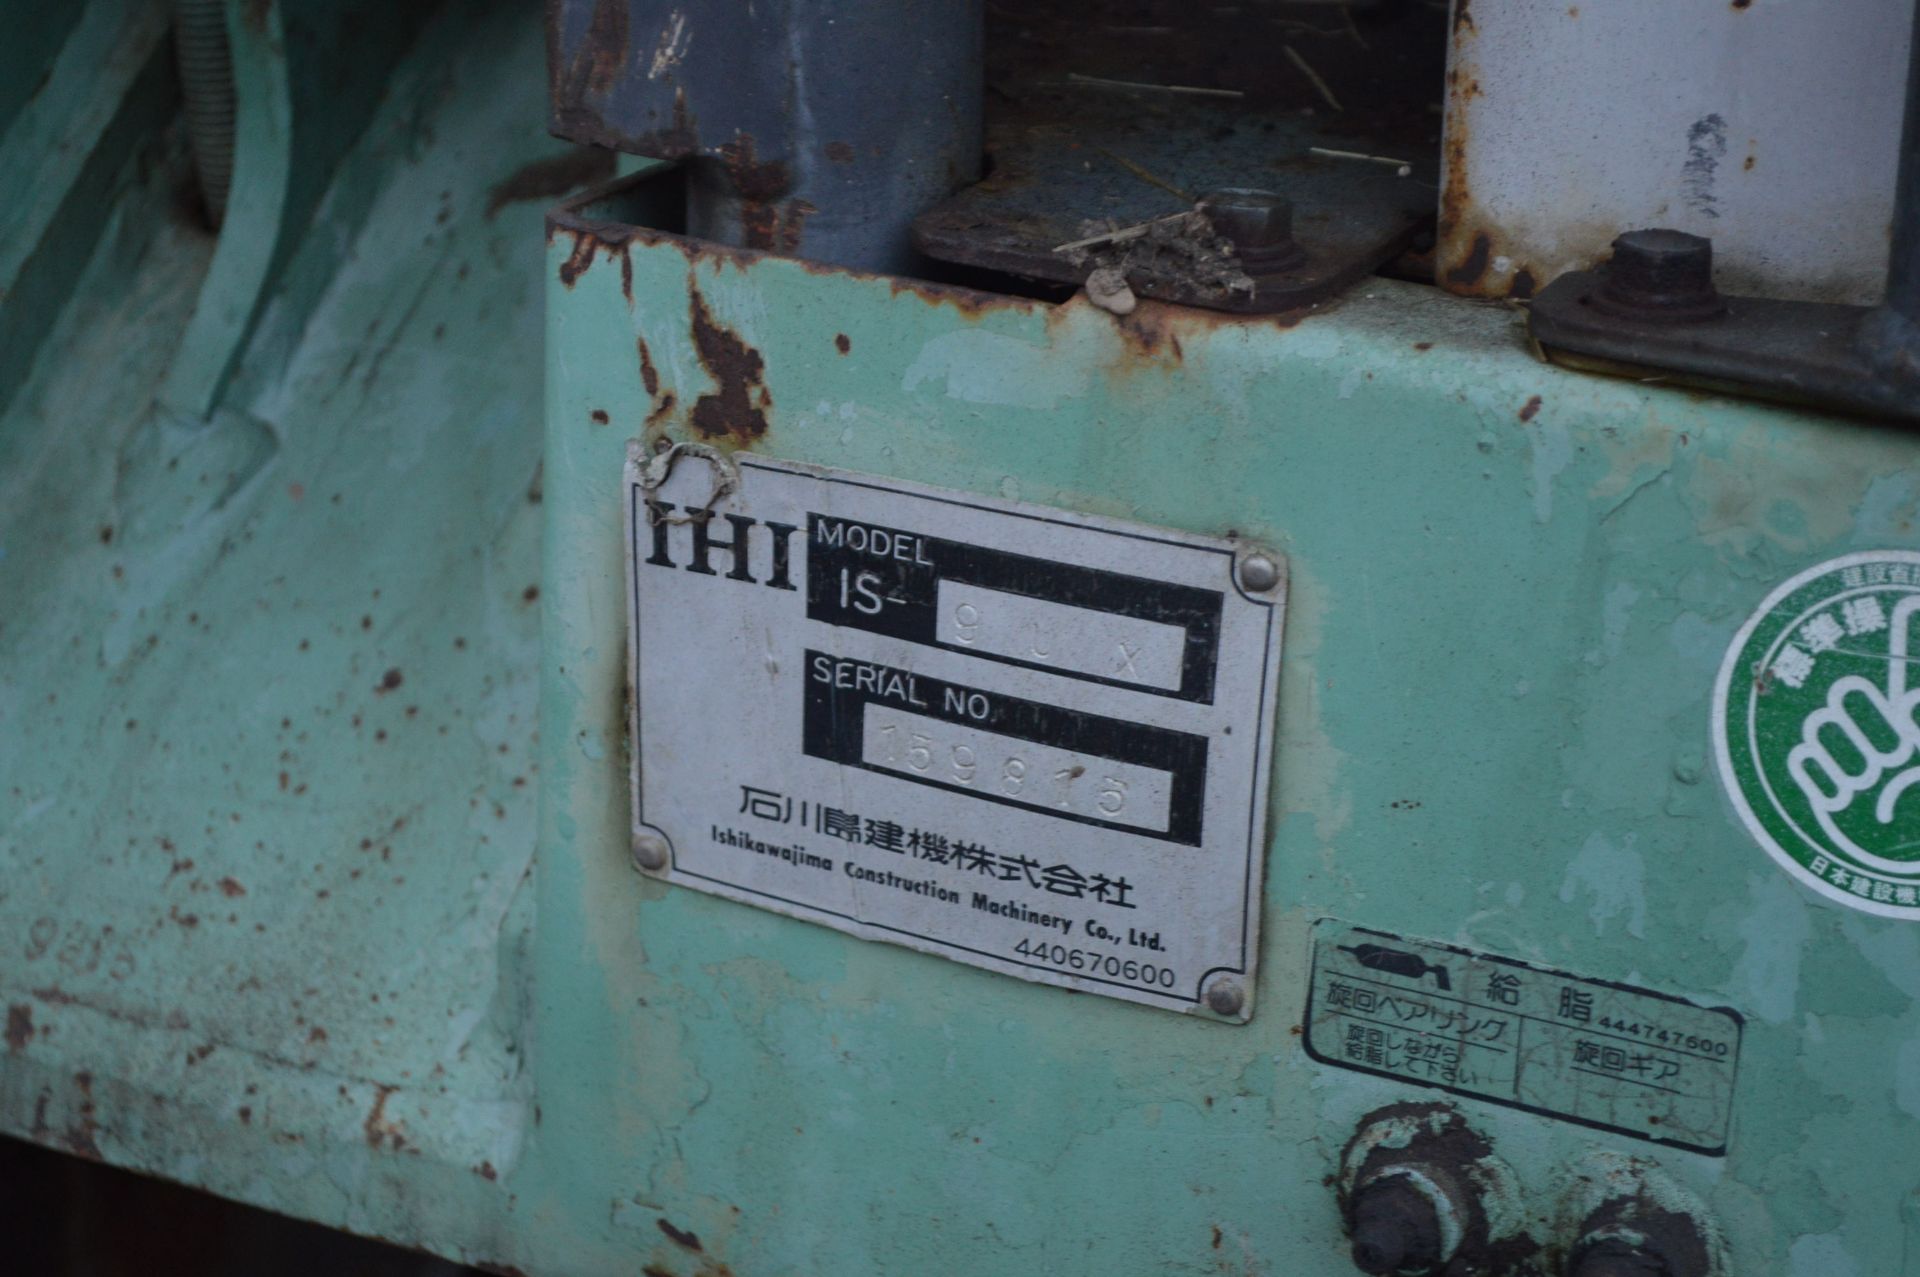 IHI IS9UX MINI DIGGER - IN WORKING ORDER *PLUS VAT* - Image 3 of 9